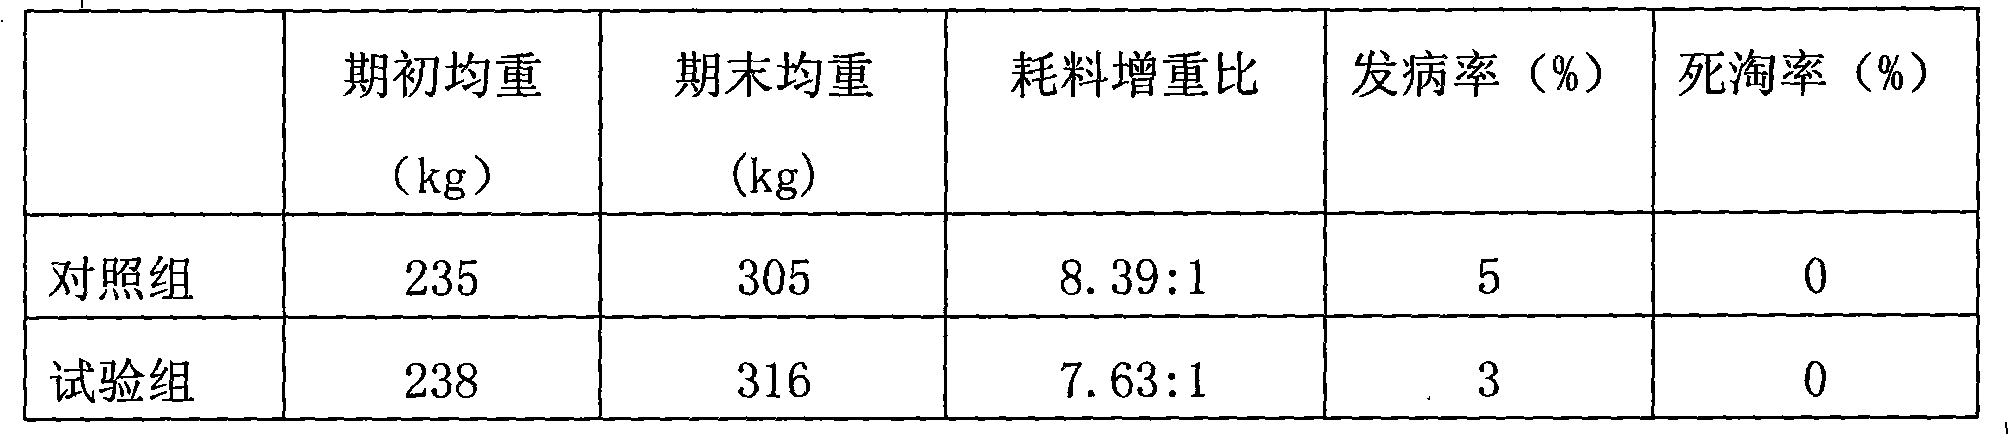 Chinese medicinal extract residual component-containing beef cattle feed and application thereof